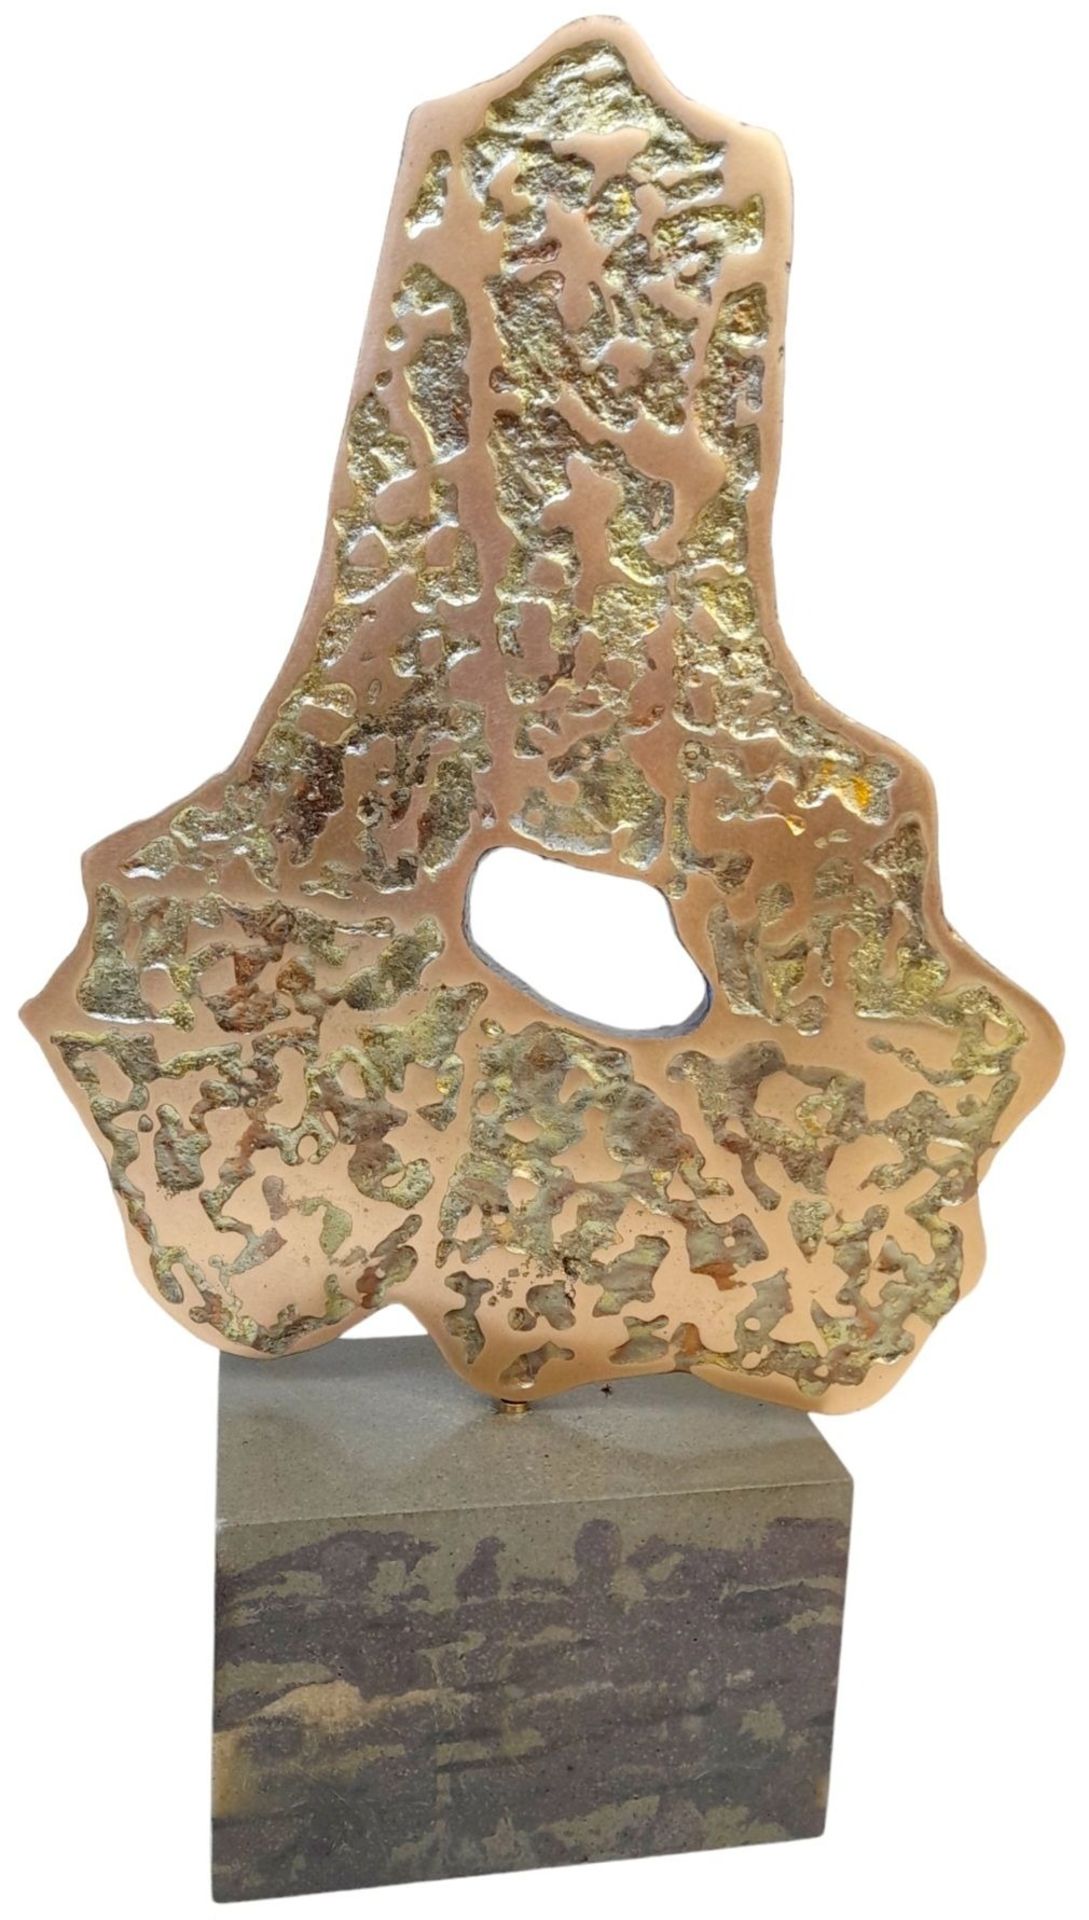 A Bronze Abstract Sculpture by Philip Hearsey, "Of this Land" - monogram signature lower edge near